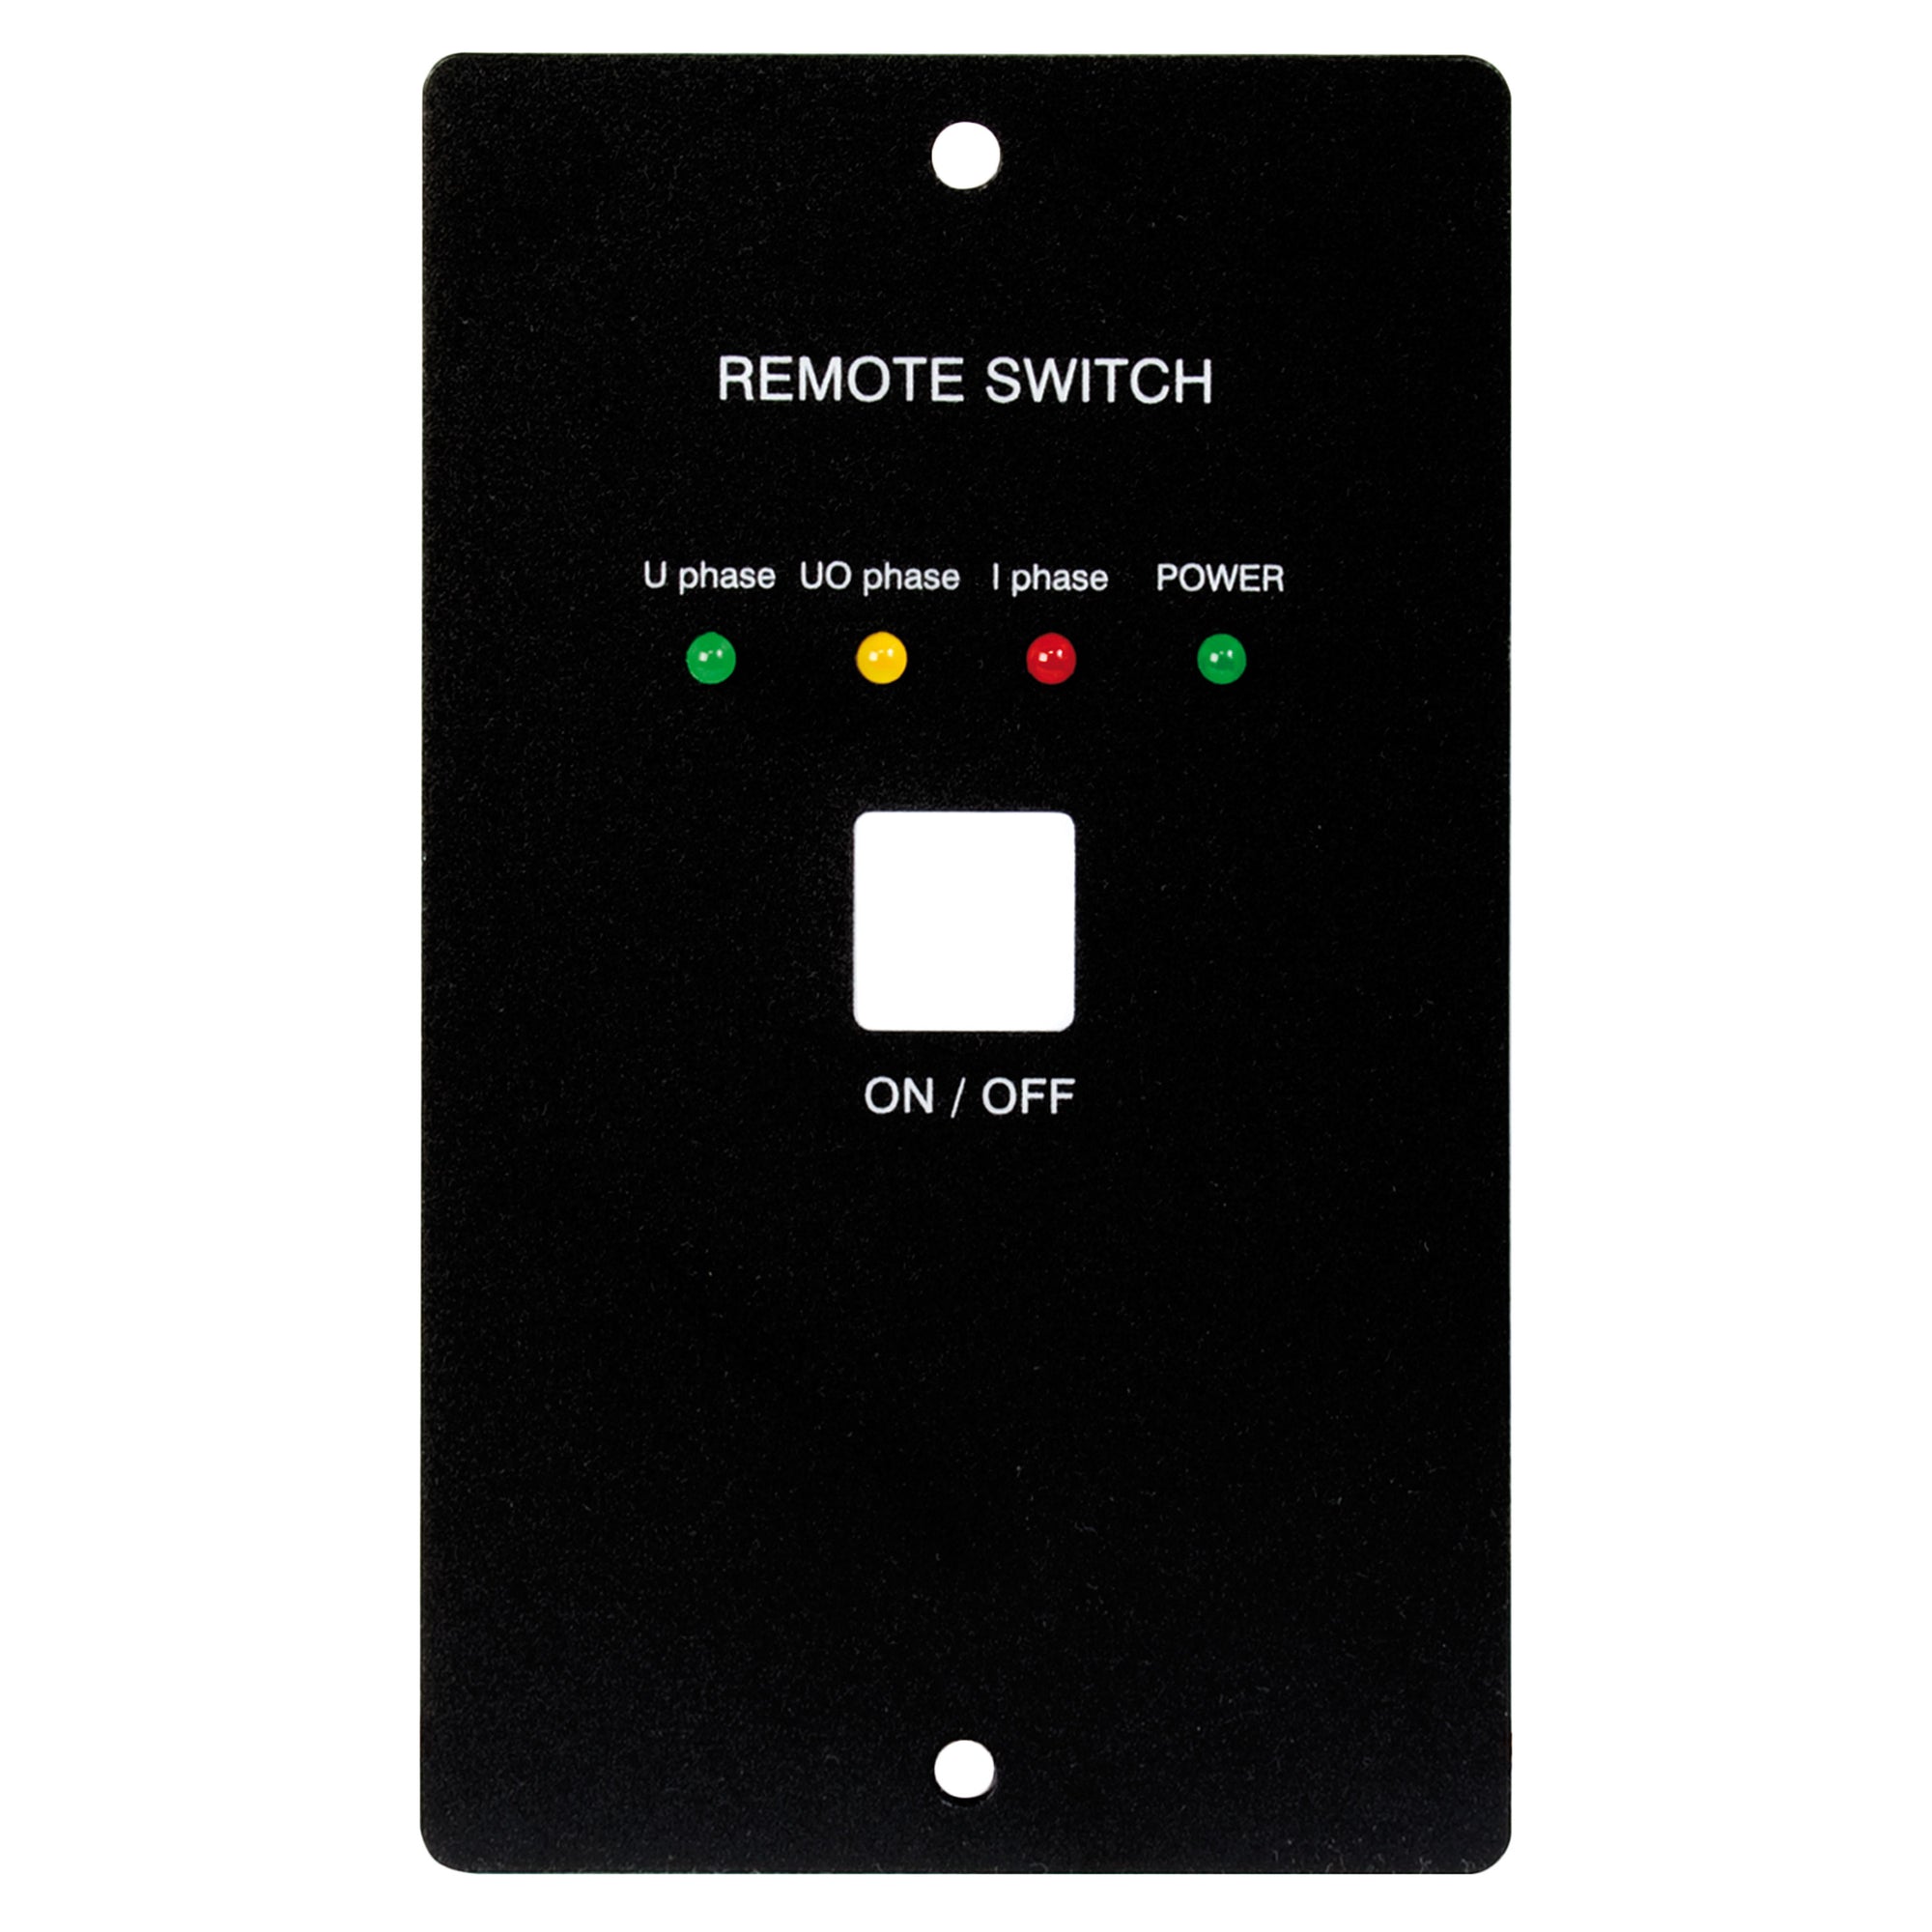 Samlex 900-RC Remote Control for SEC Chargers